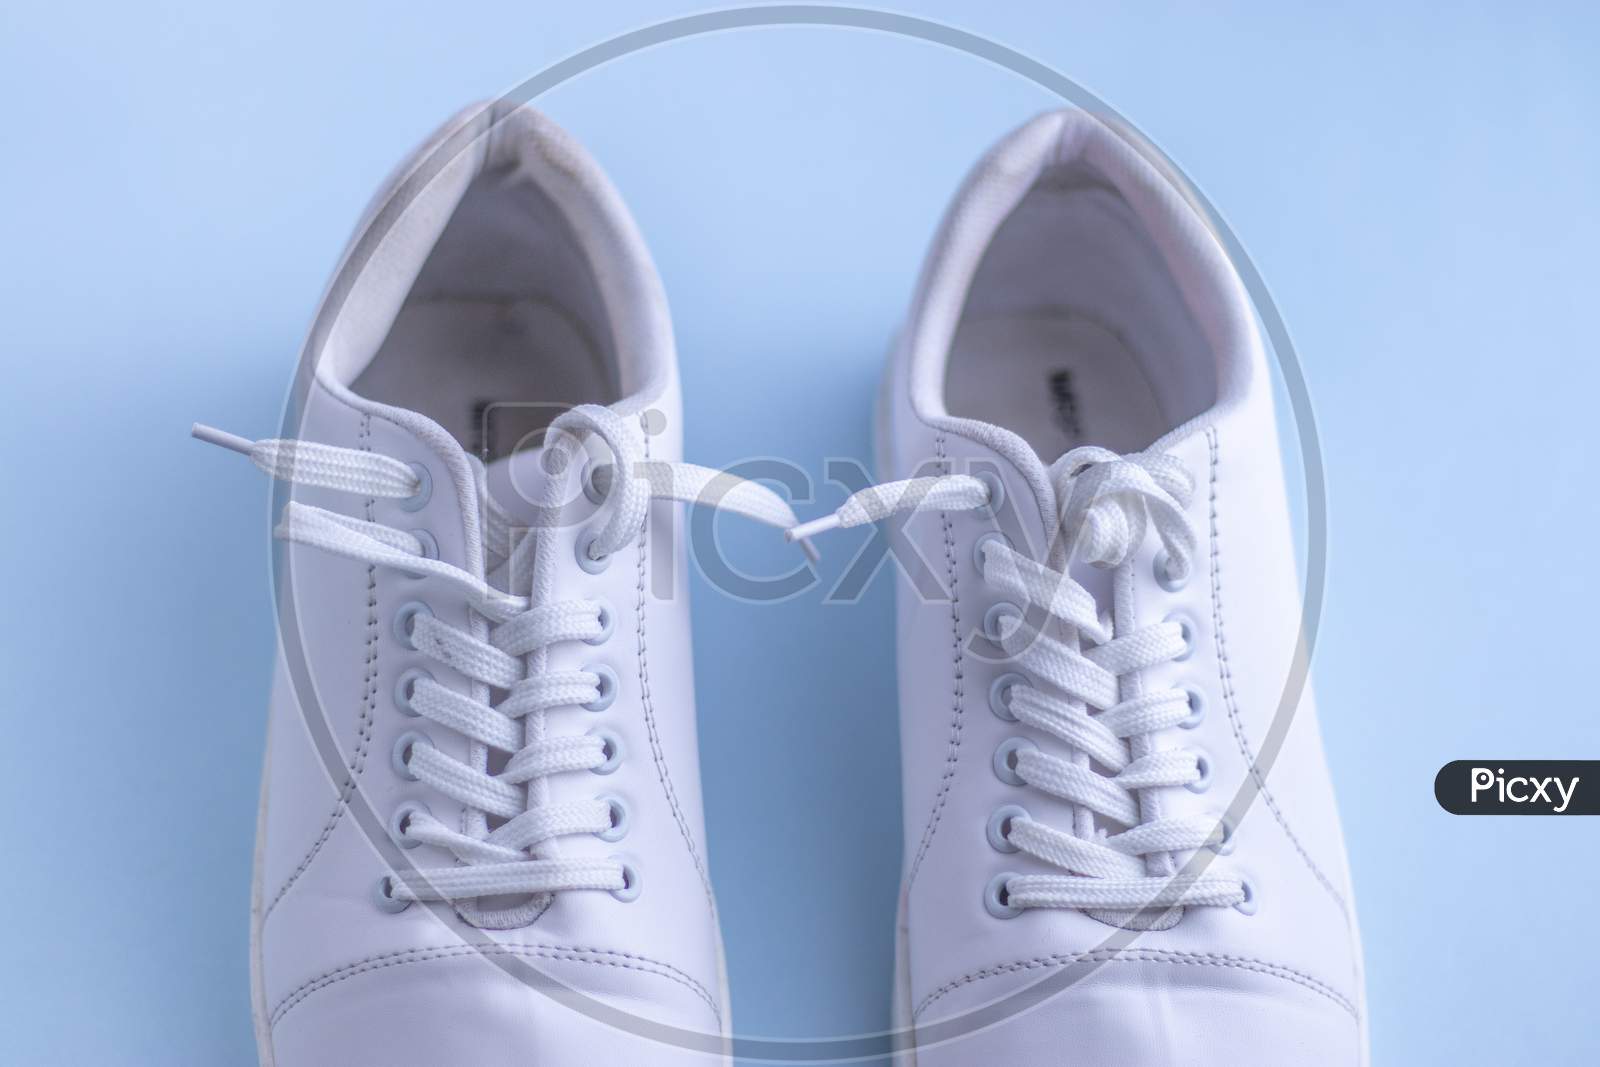 White sneakers on light blue colour background, flat lay top view minimal background.